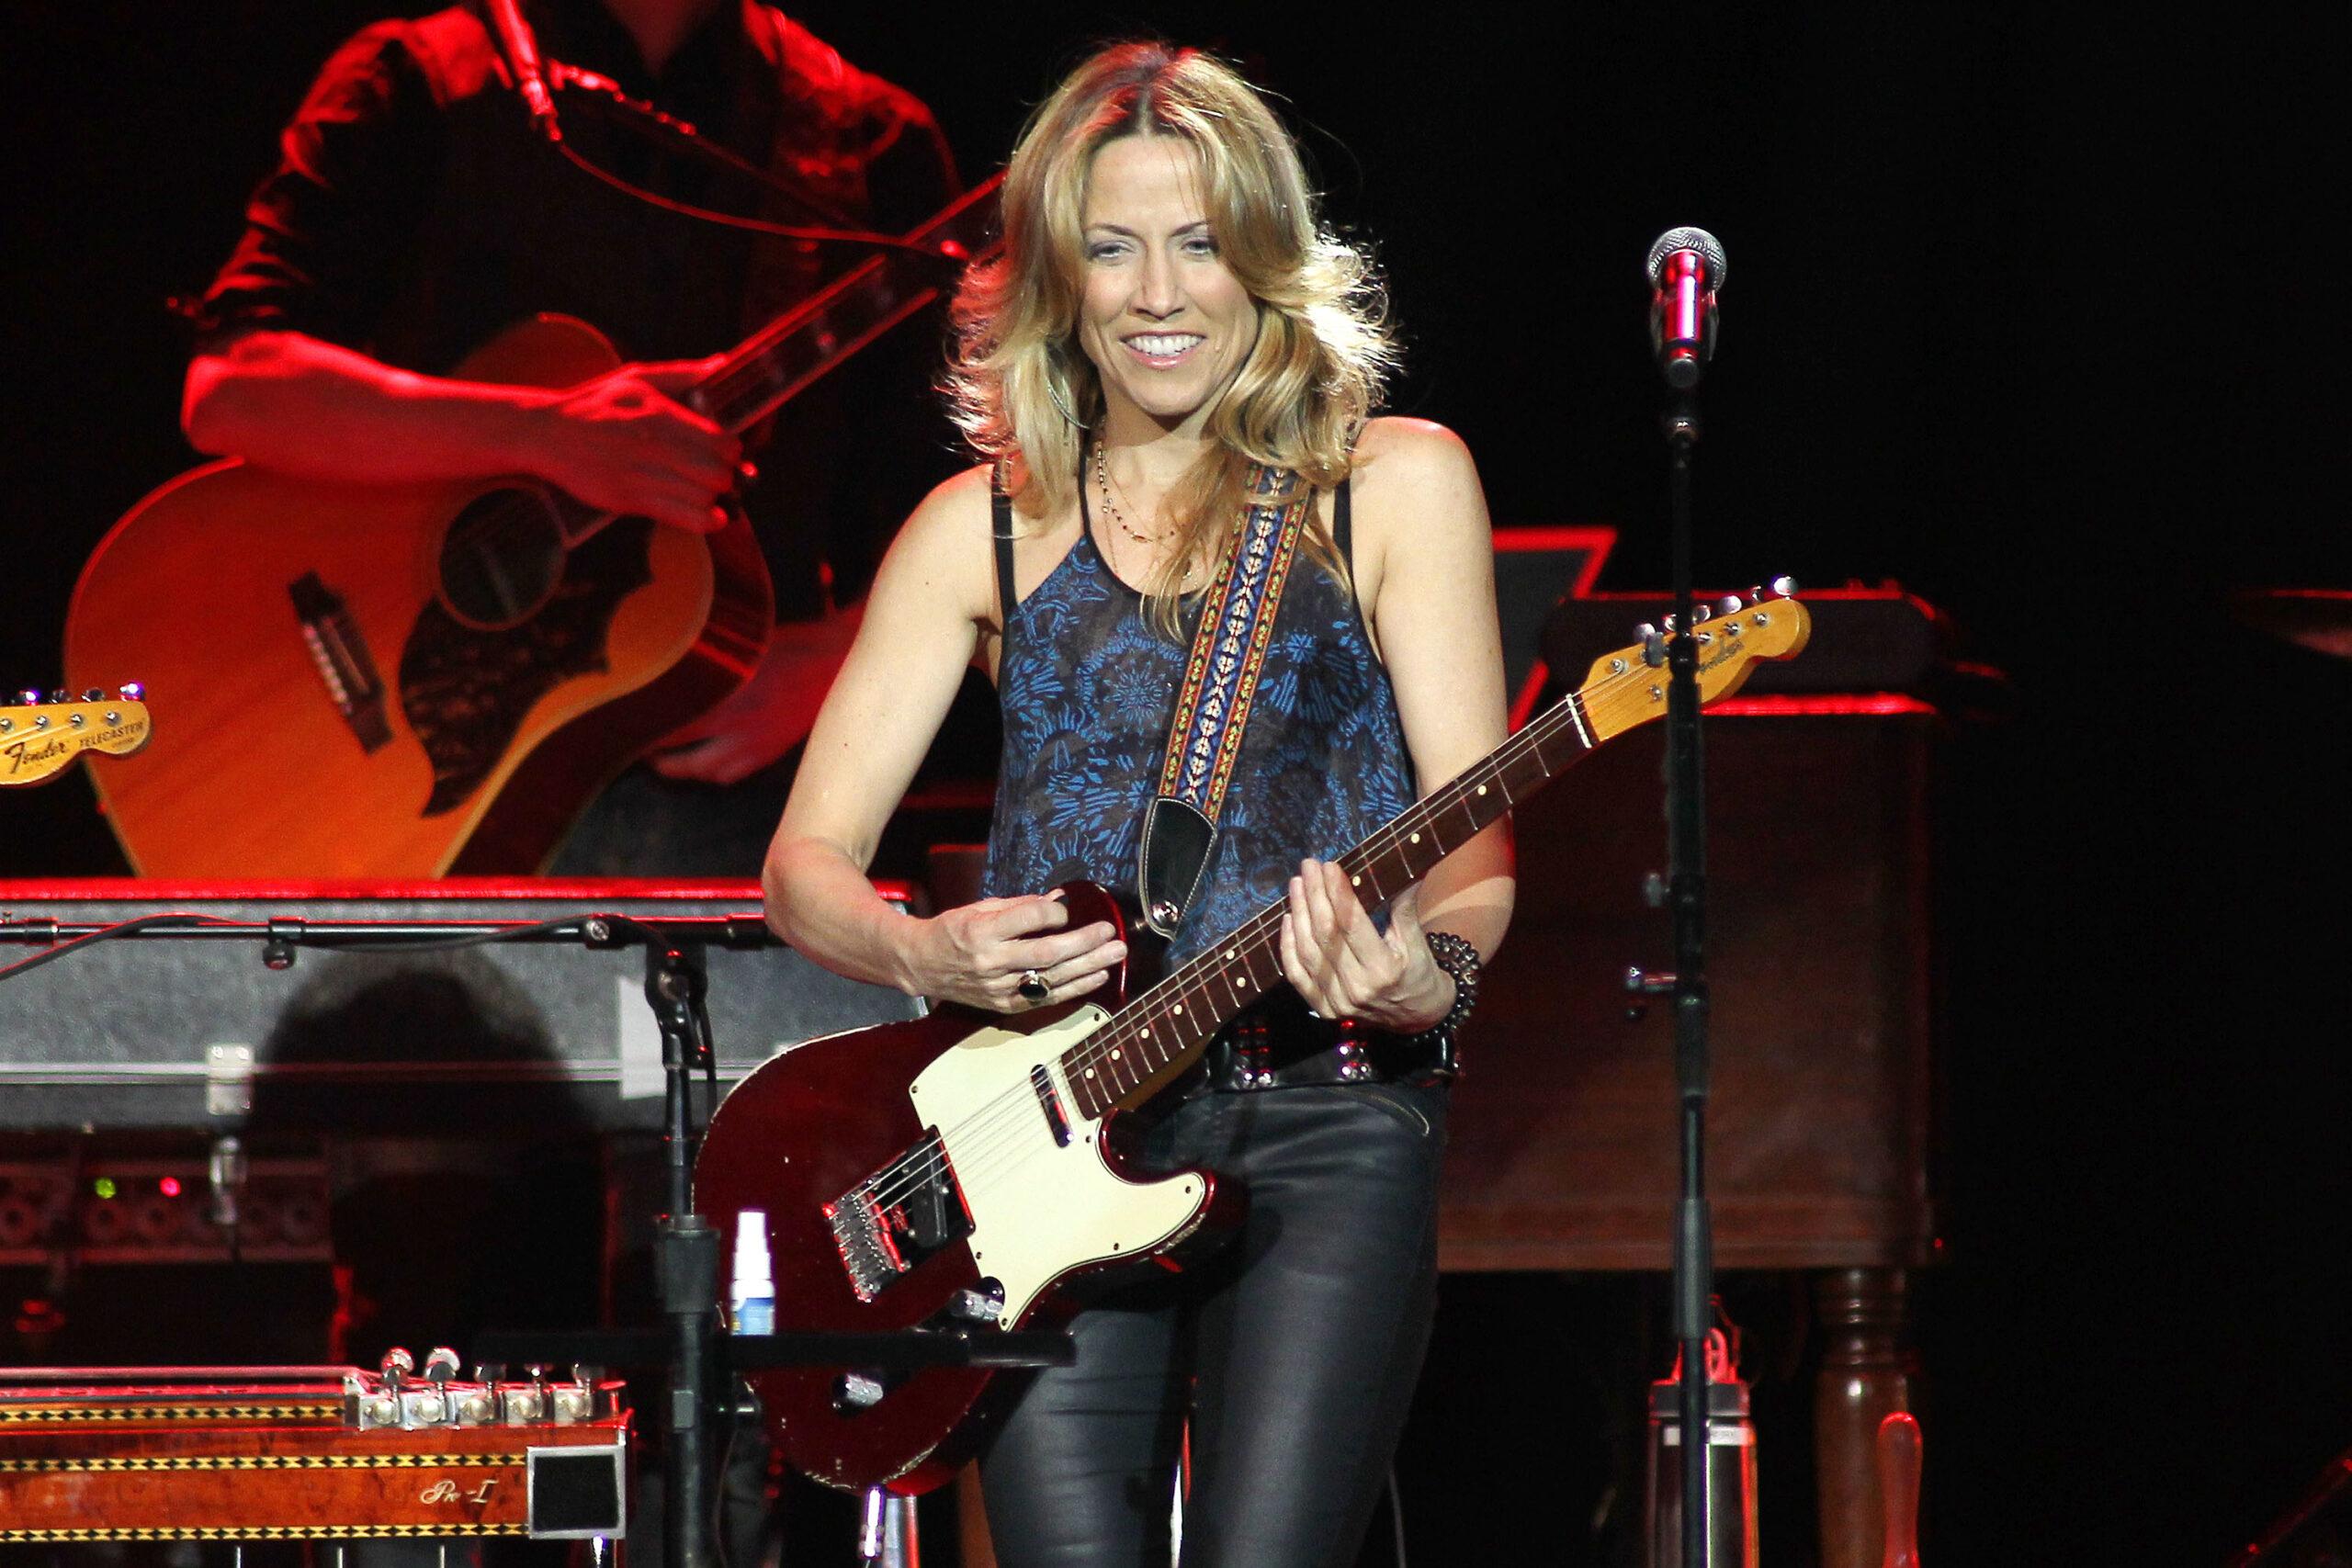 Sheryl Crow performs in concert at Hard Rock Live at Seminole Hard Rock Hotel & Casino, Hollywood on 03/16/2016